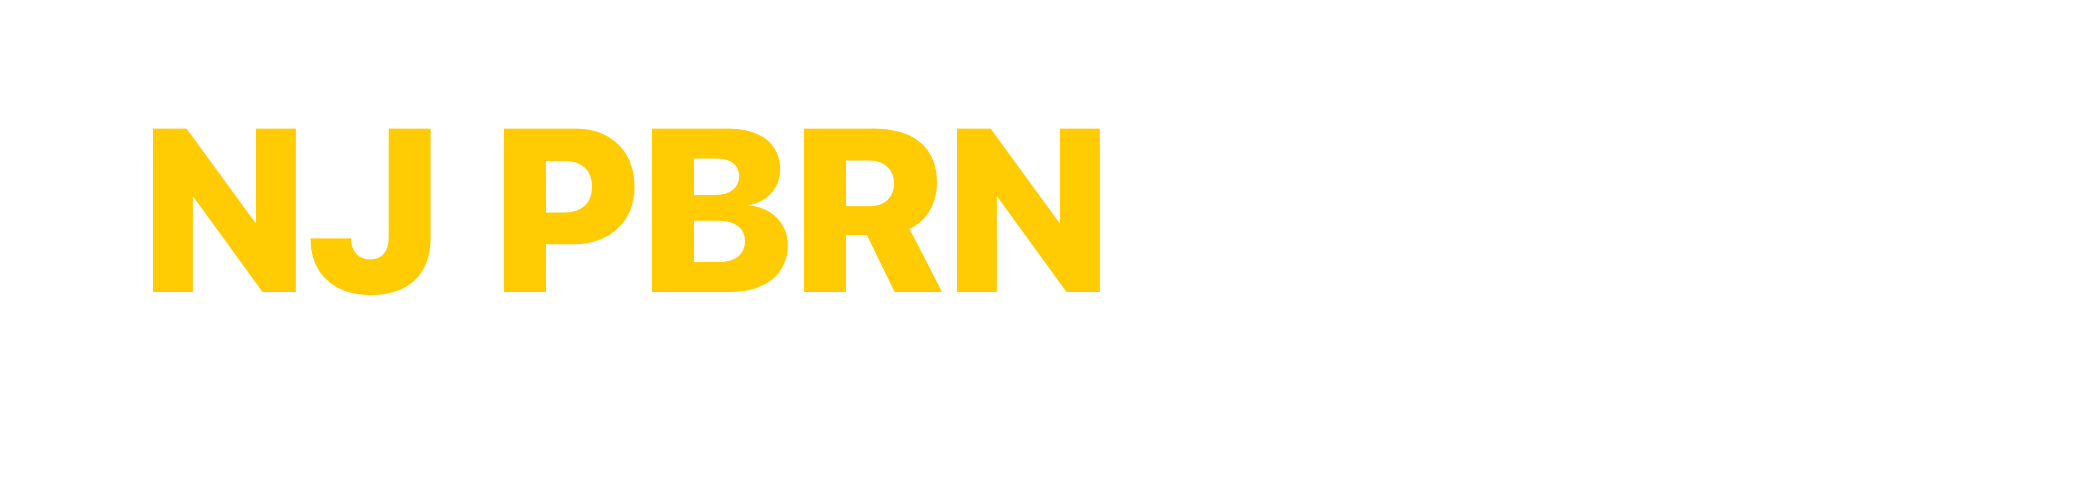 New Jersey Practice-Based Research Network (PBRN)